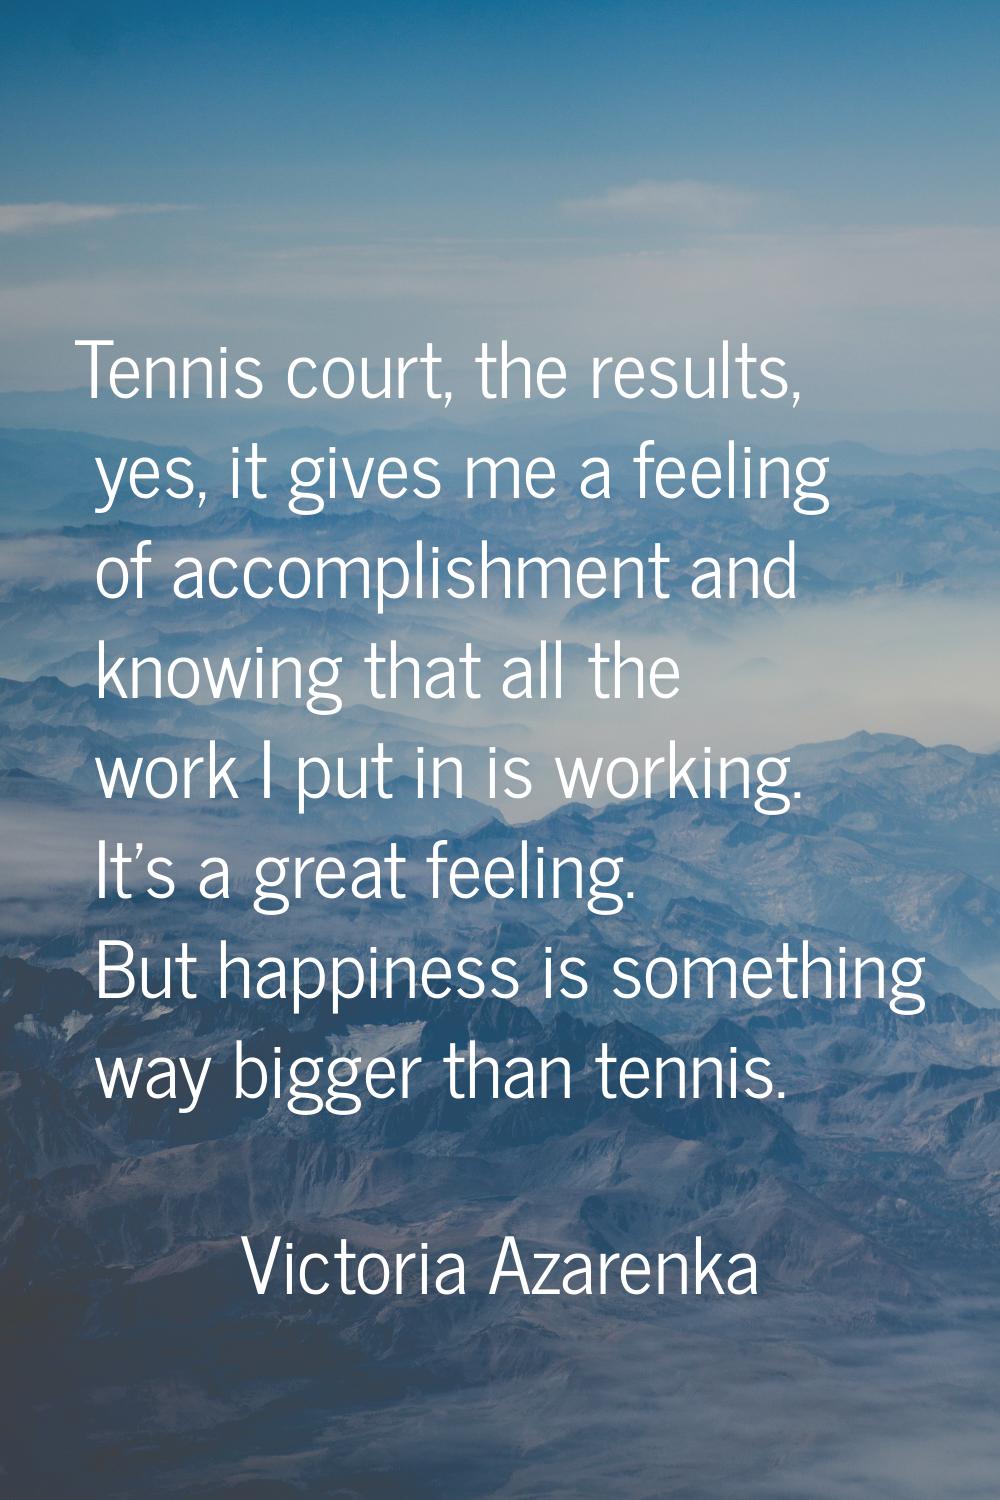 Tennis court, the results, yes, it gives me a feeling of accomplishment and knowing that all the wo